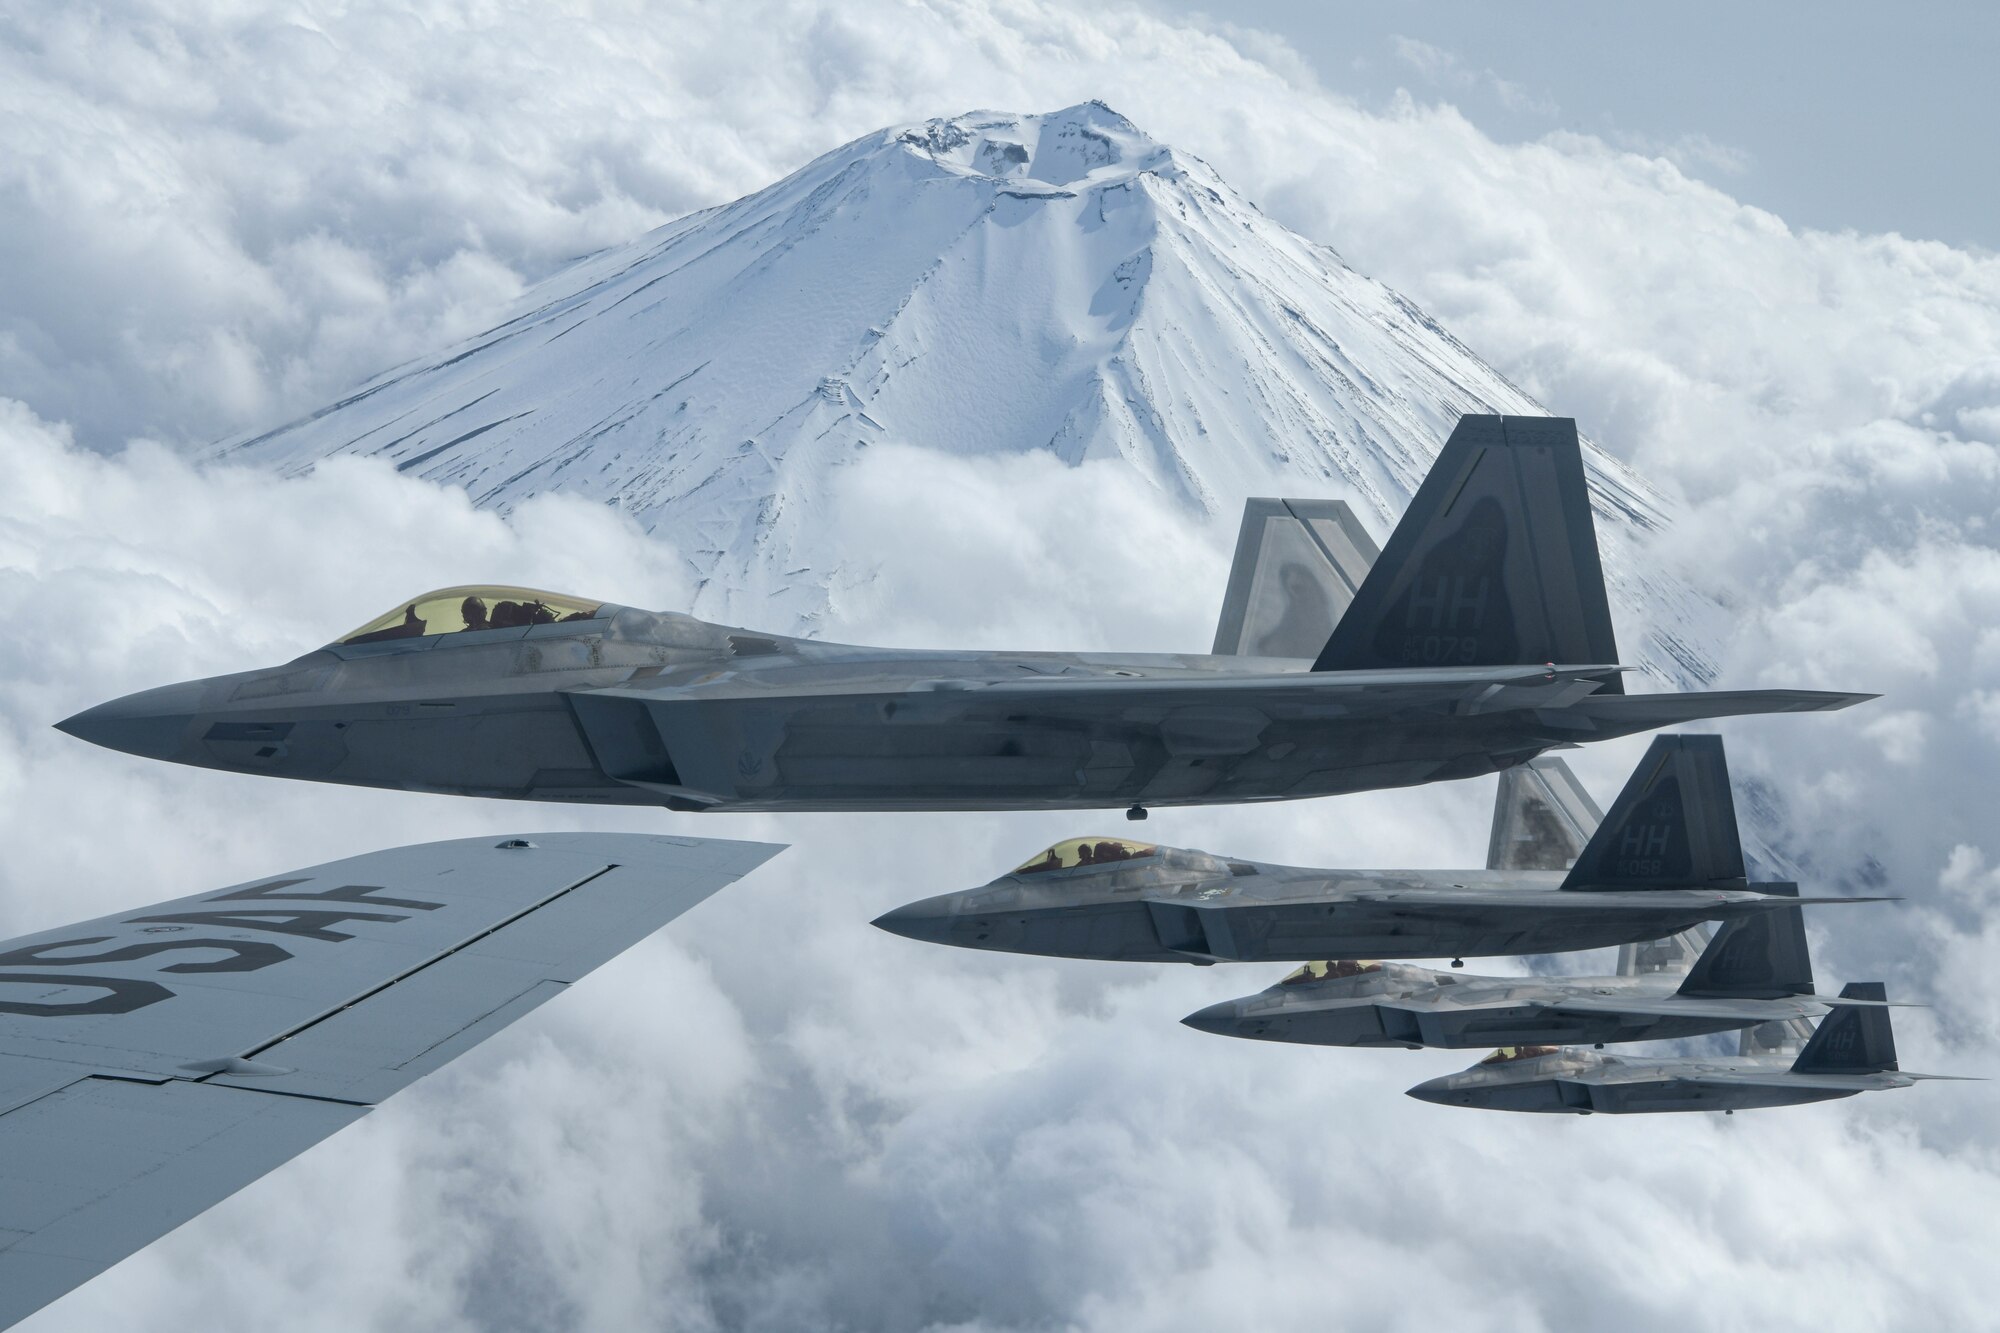 Four F-22 Raptors from the 199th Fighter Squadron fly alongside a U.S. Air Force KC-135 Stratotanker